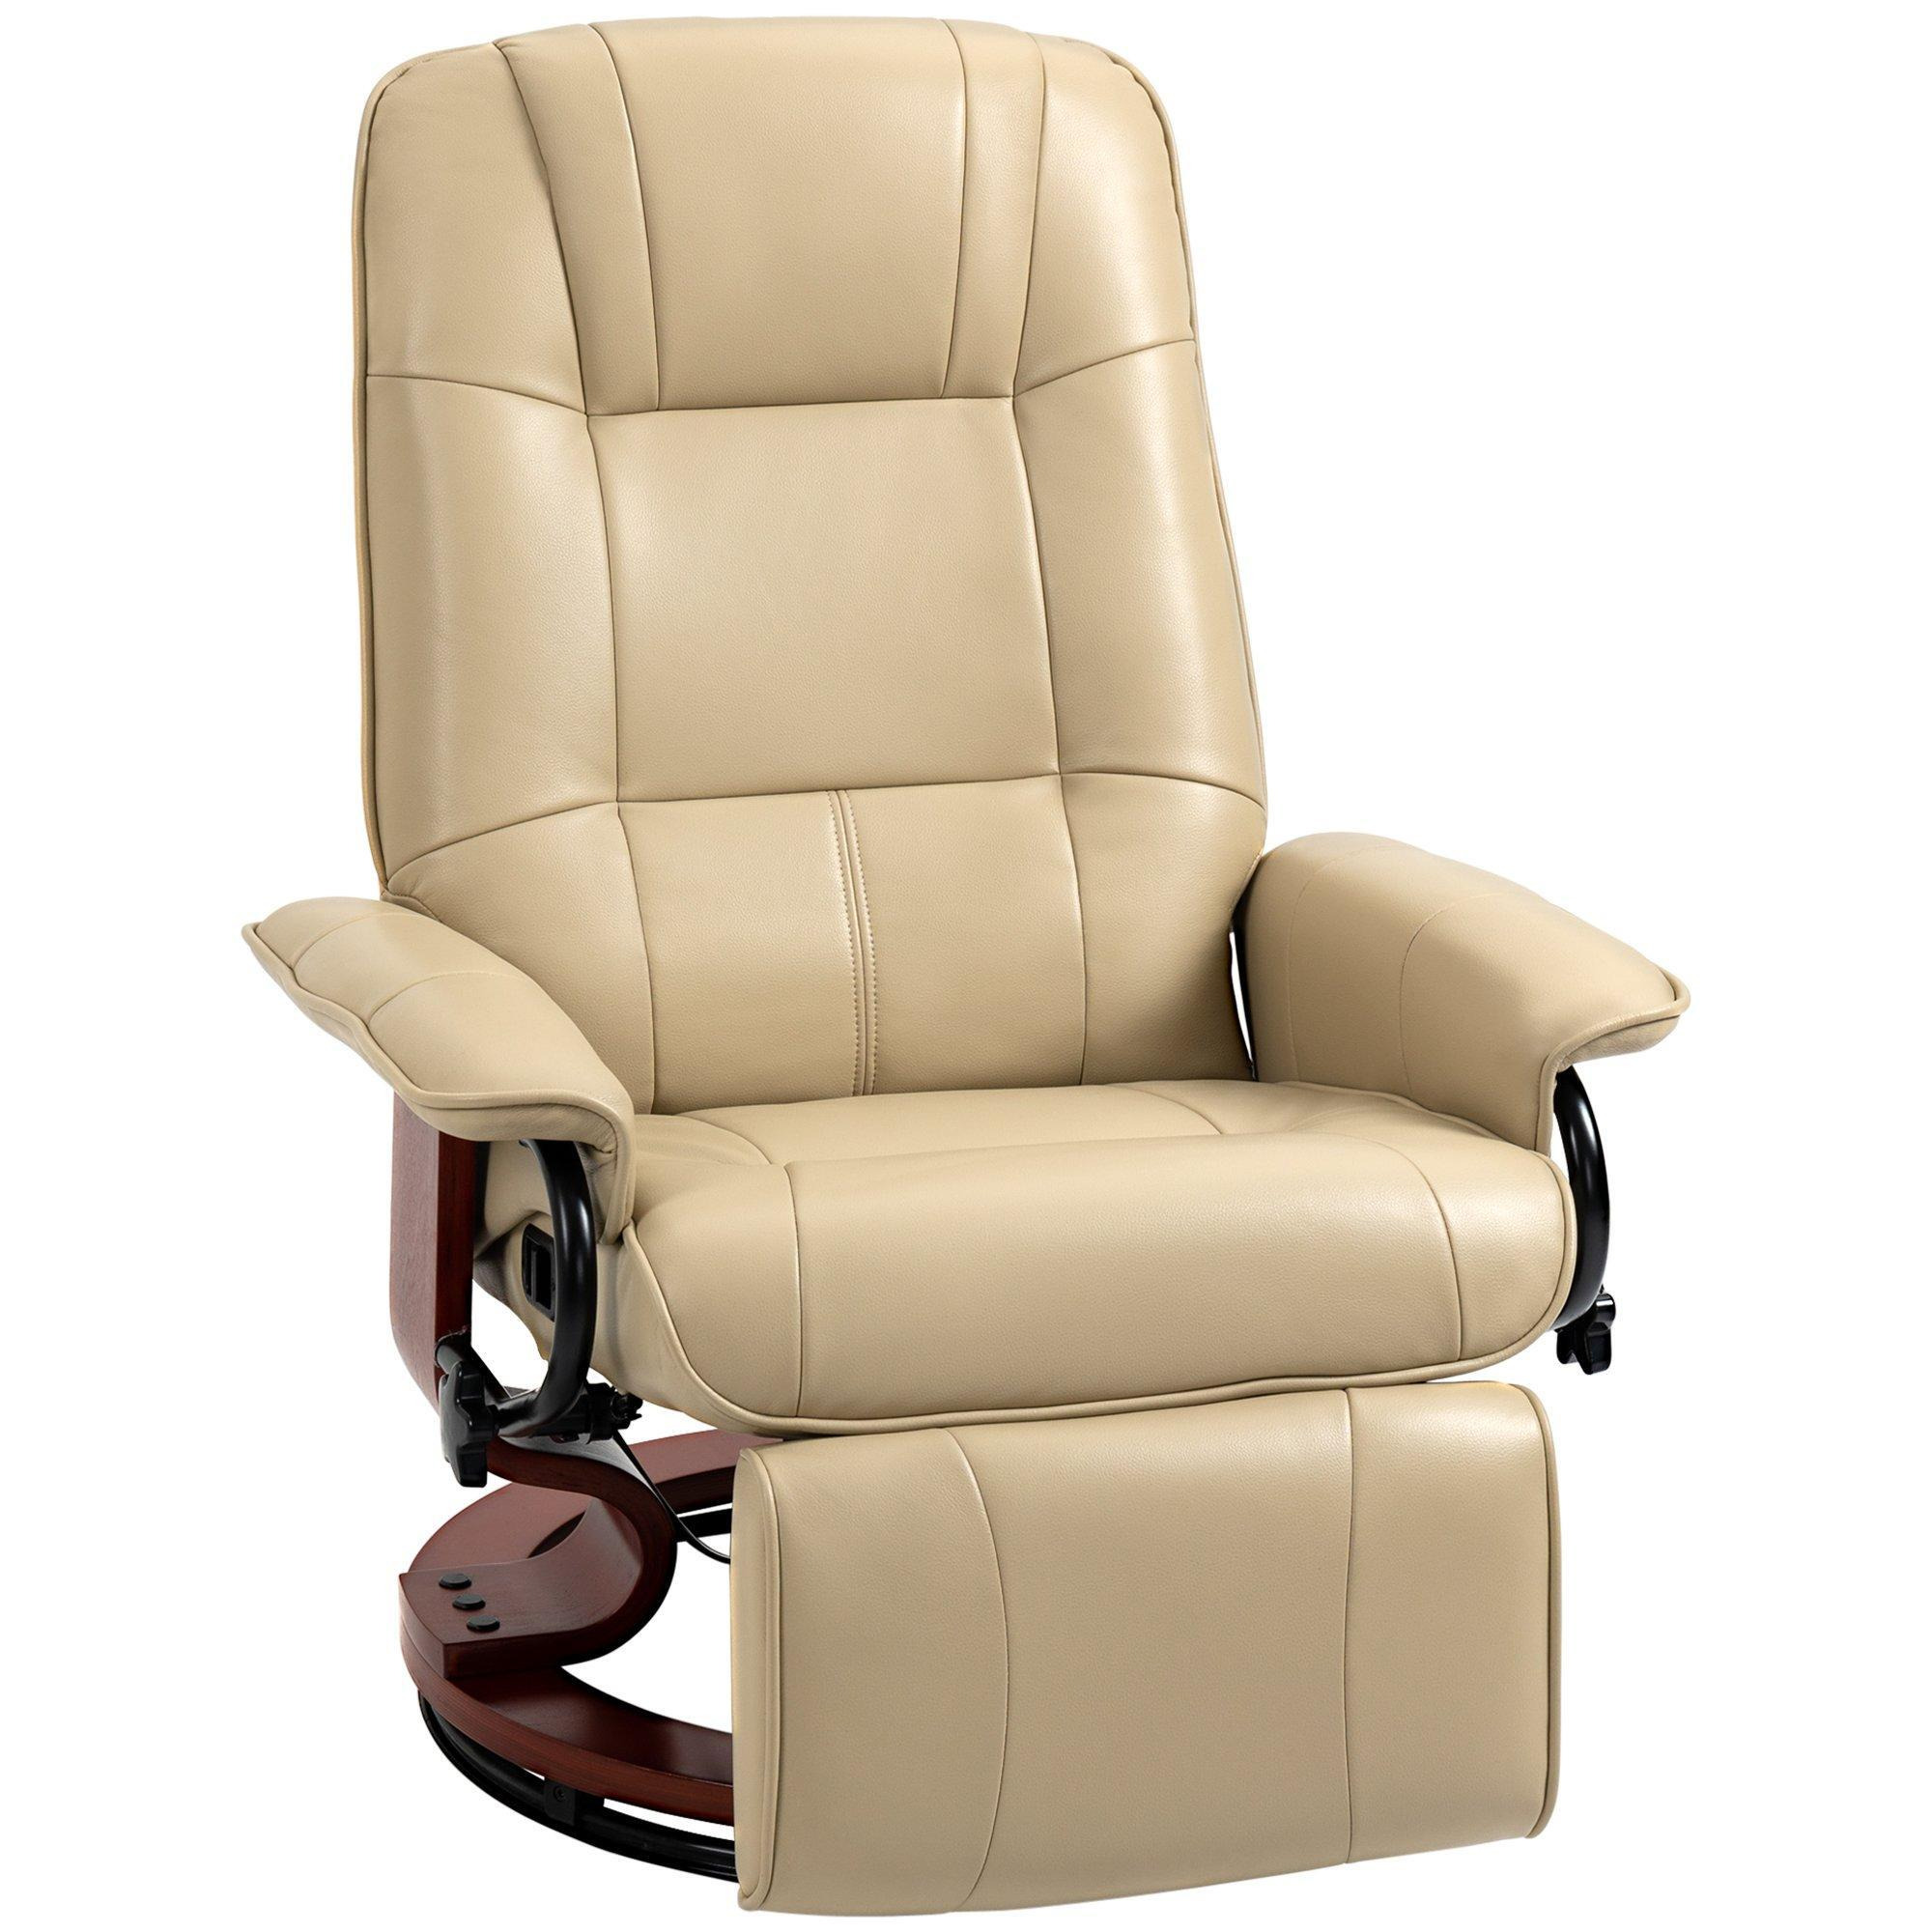 Ergonomic Recliner Sofa Chair PU Leather Armchair Lounger - image 1